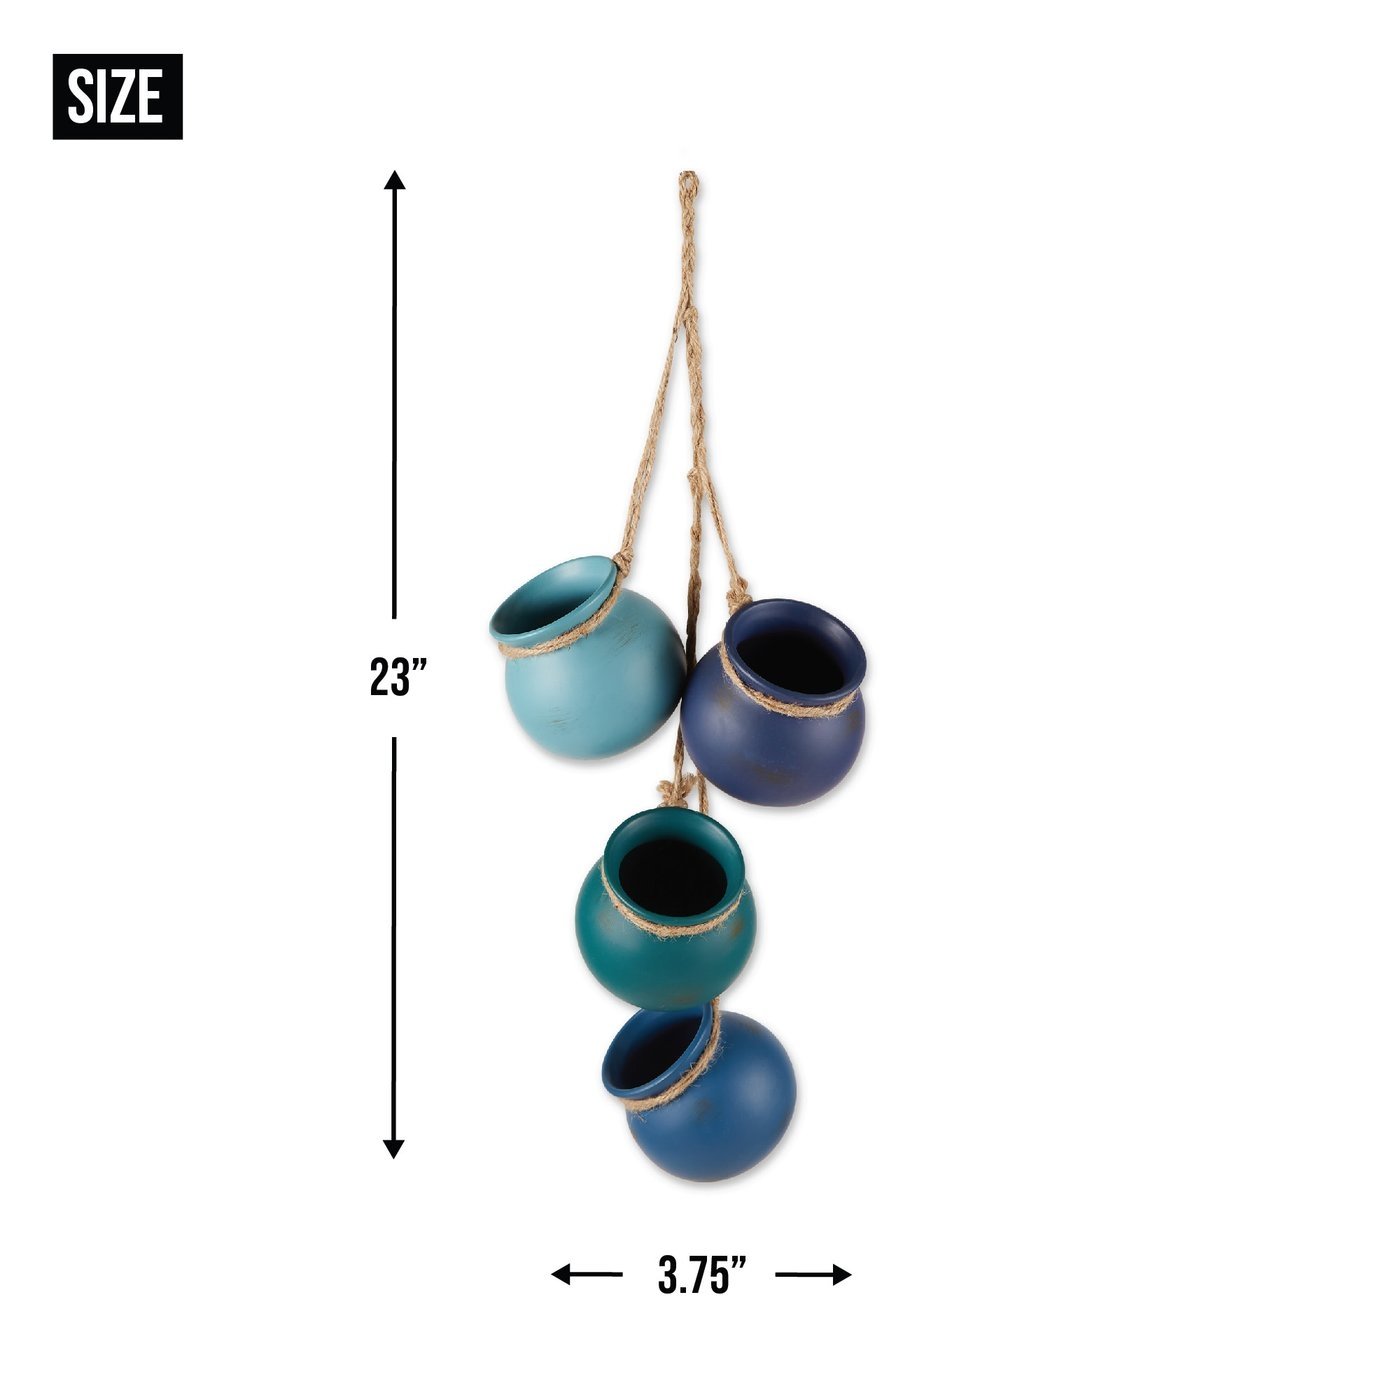 Dangling Pots Decor in Blue Tones - Ethereal Company